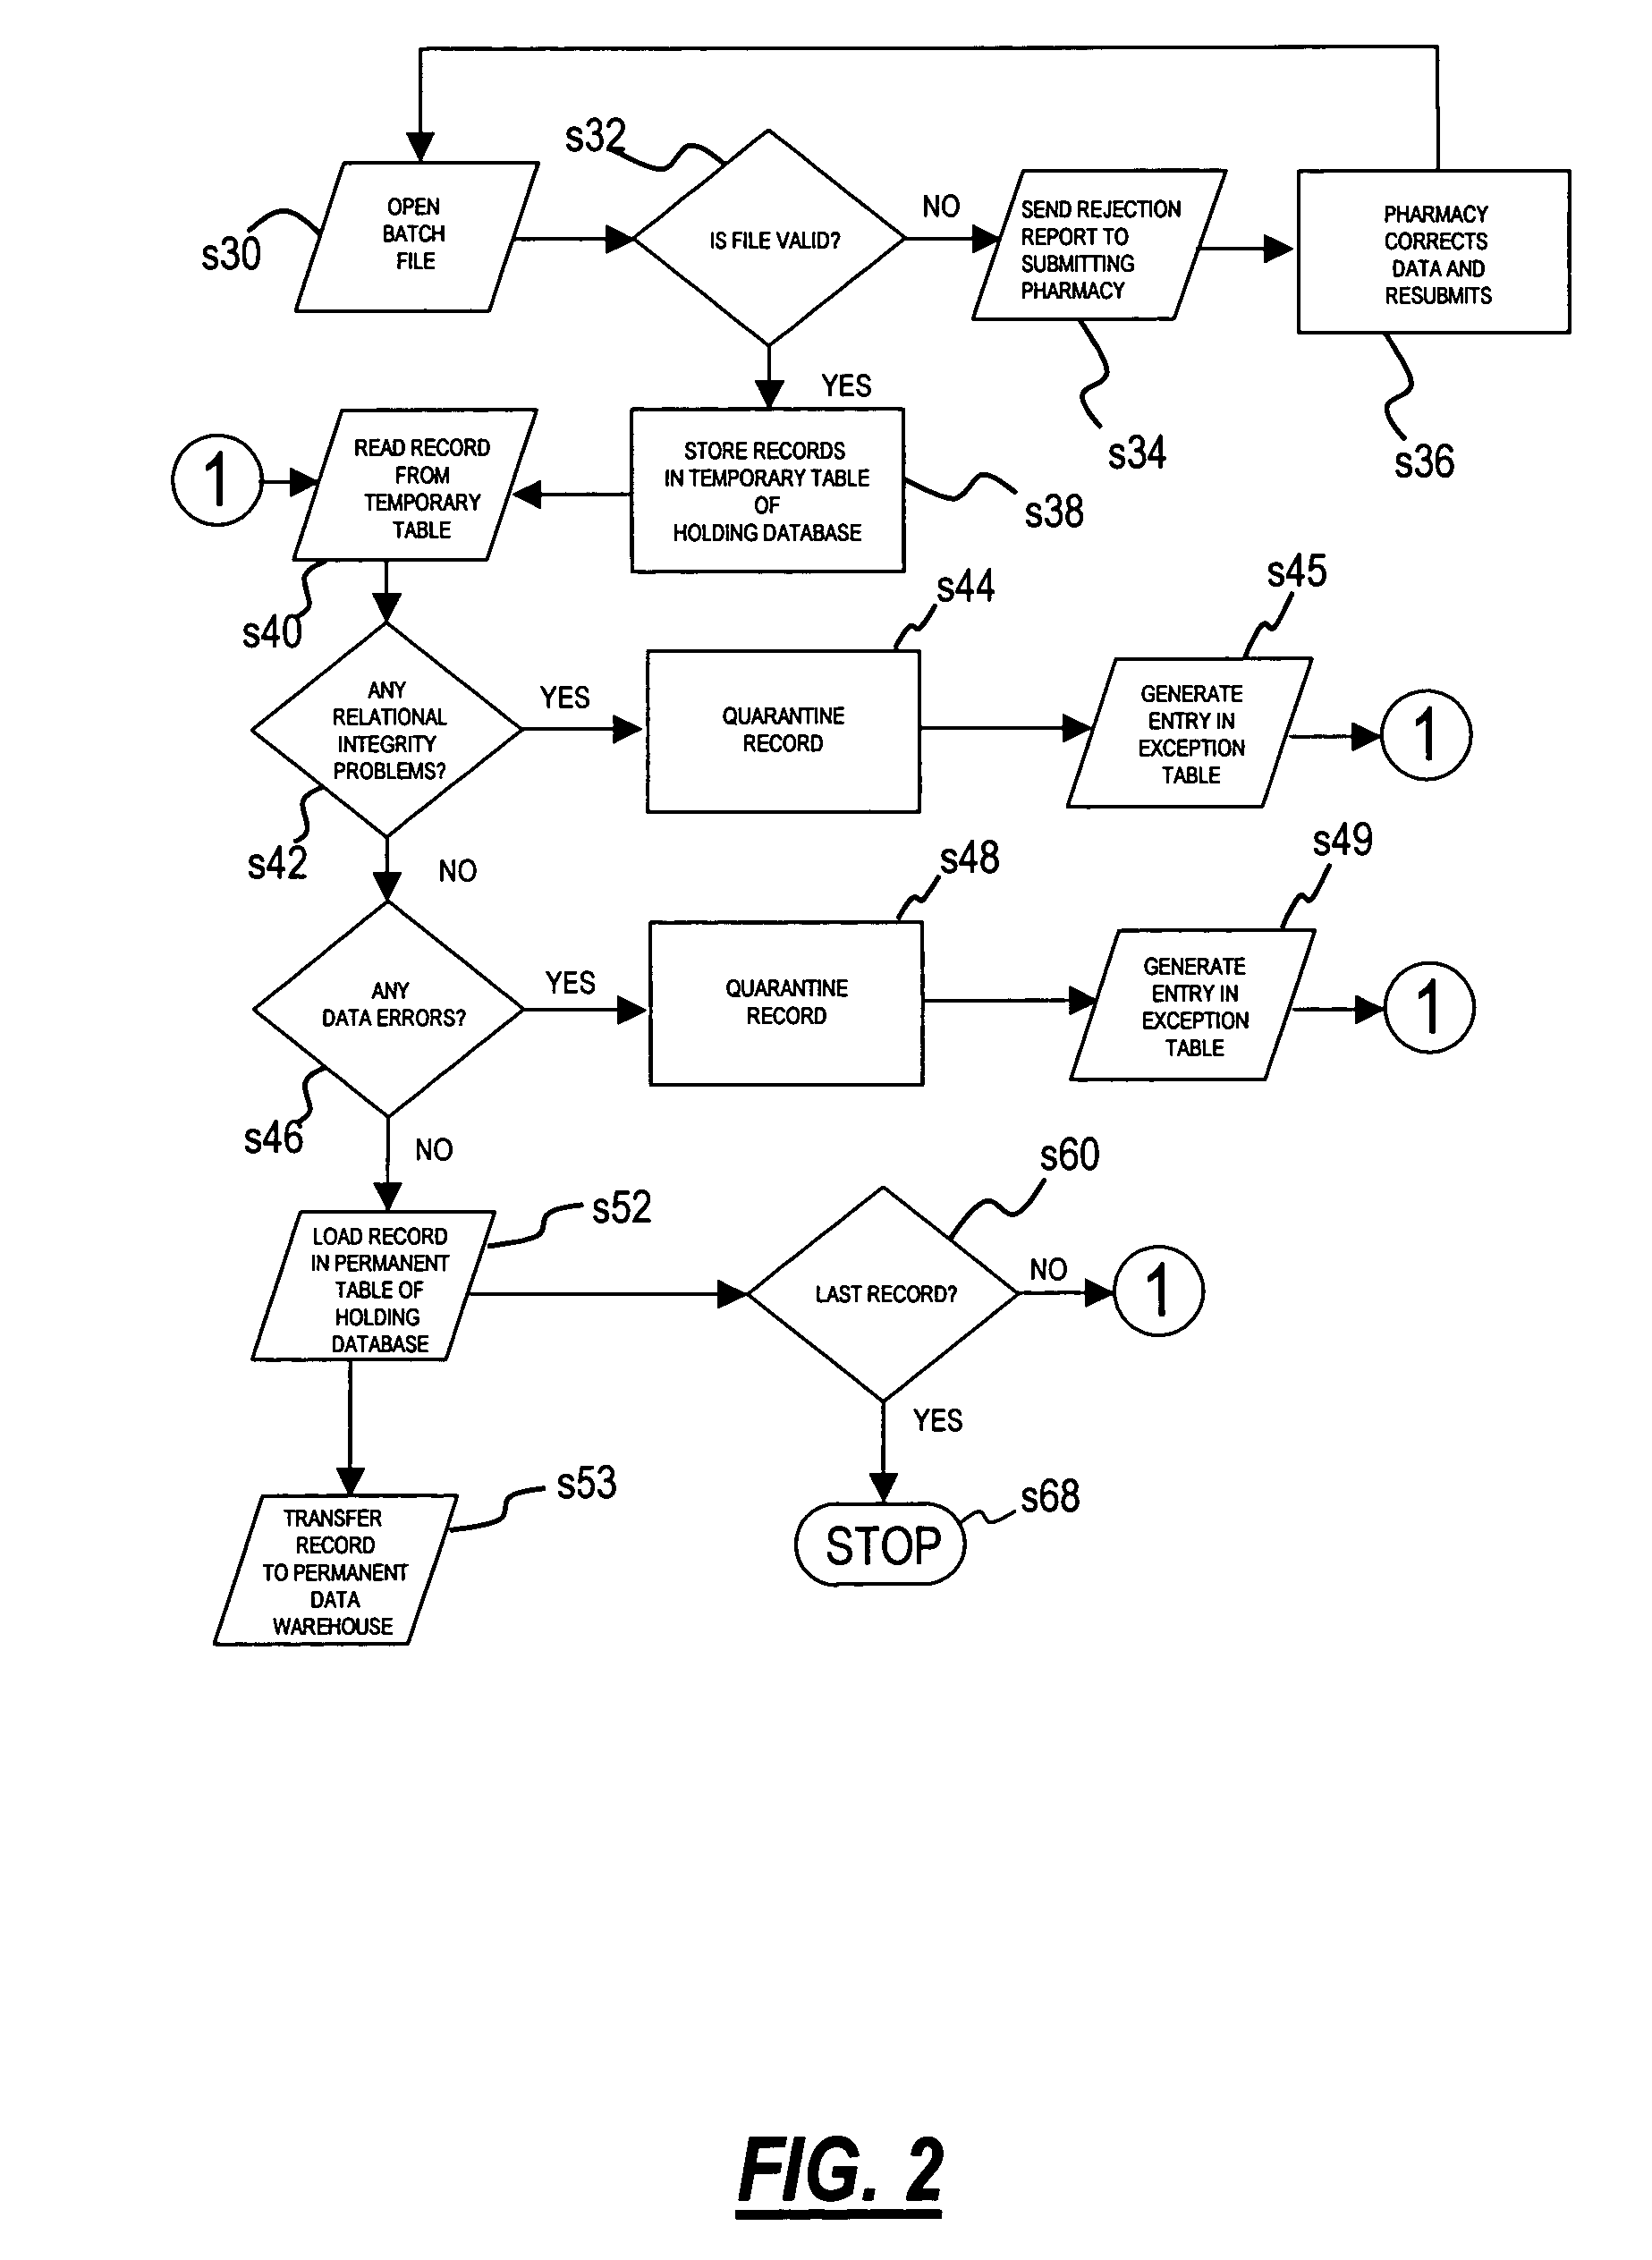 Method for processing and organizing pharmacy data